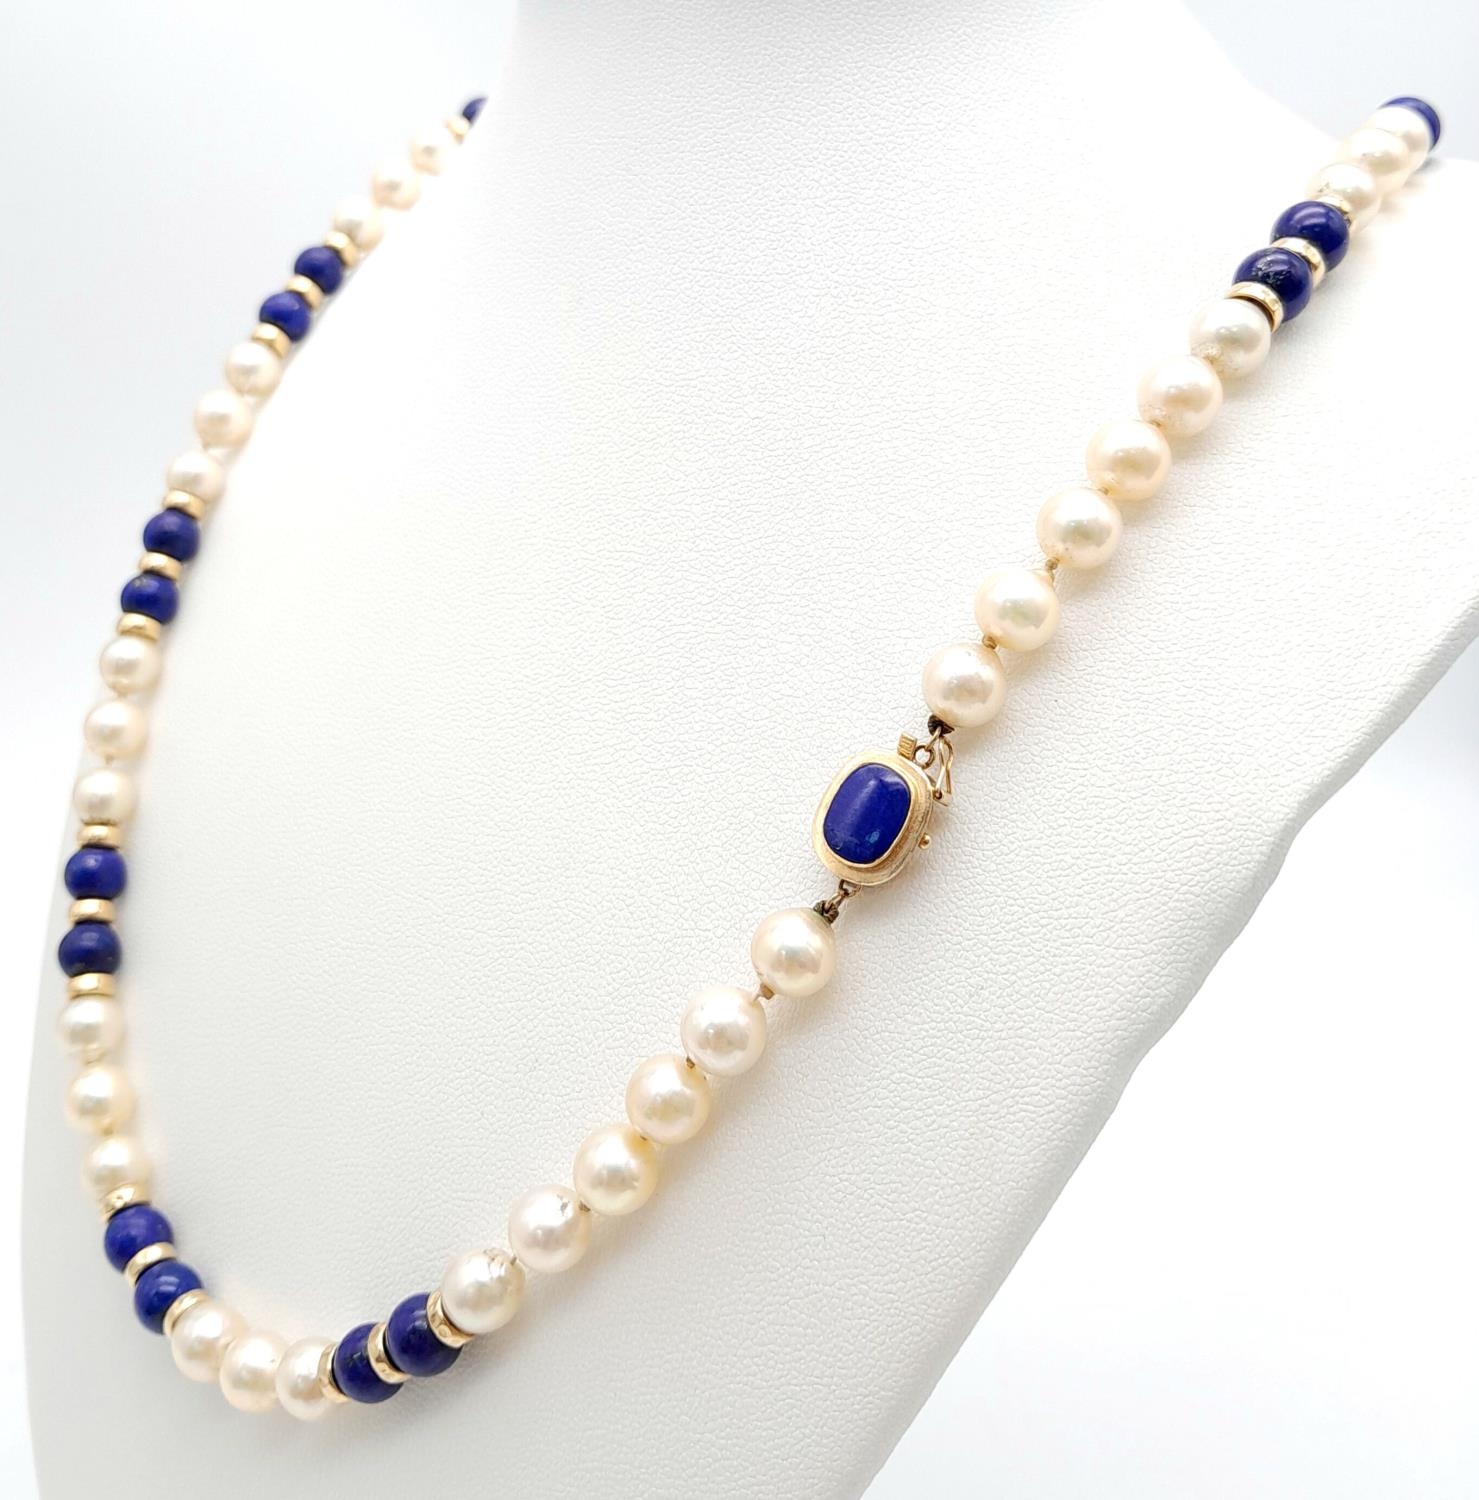 A Lapis and Pearl Necklace with 14K Gold Spacers and Clasp. 68cm - Image 2 of 6